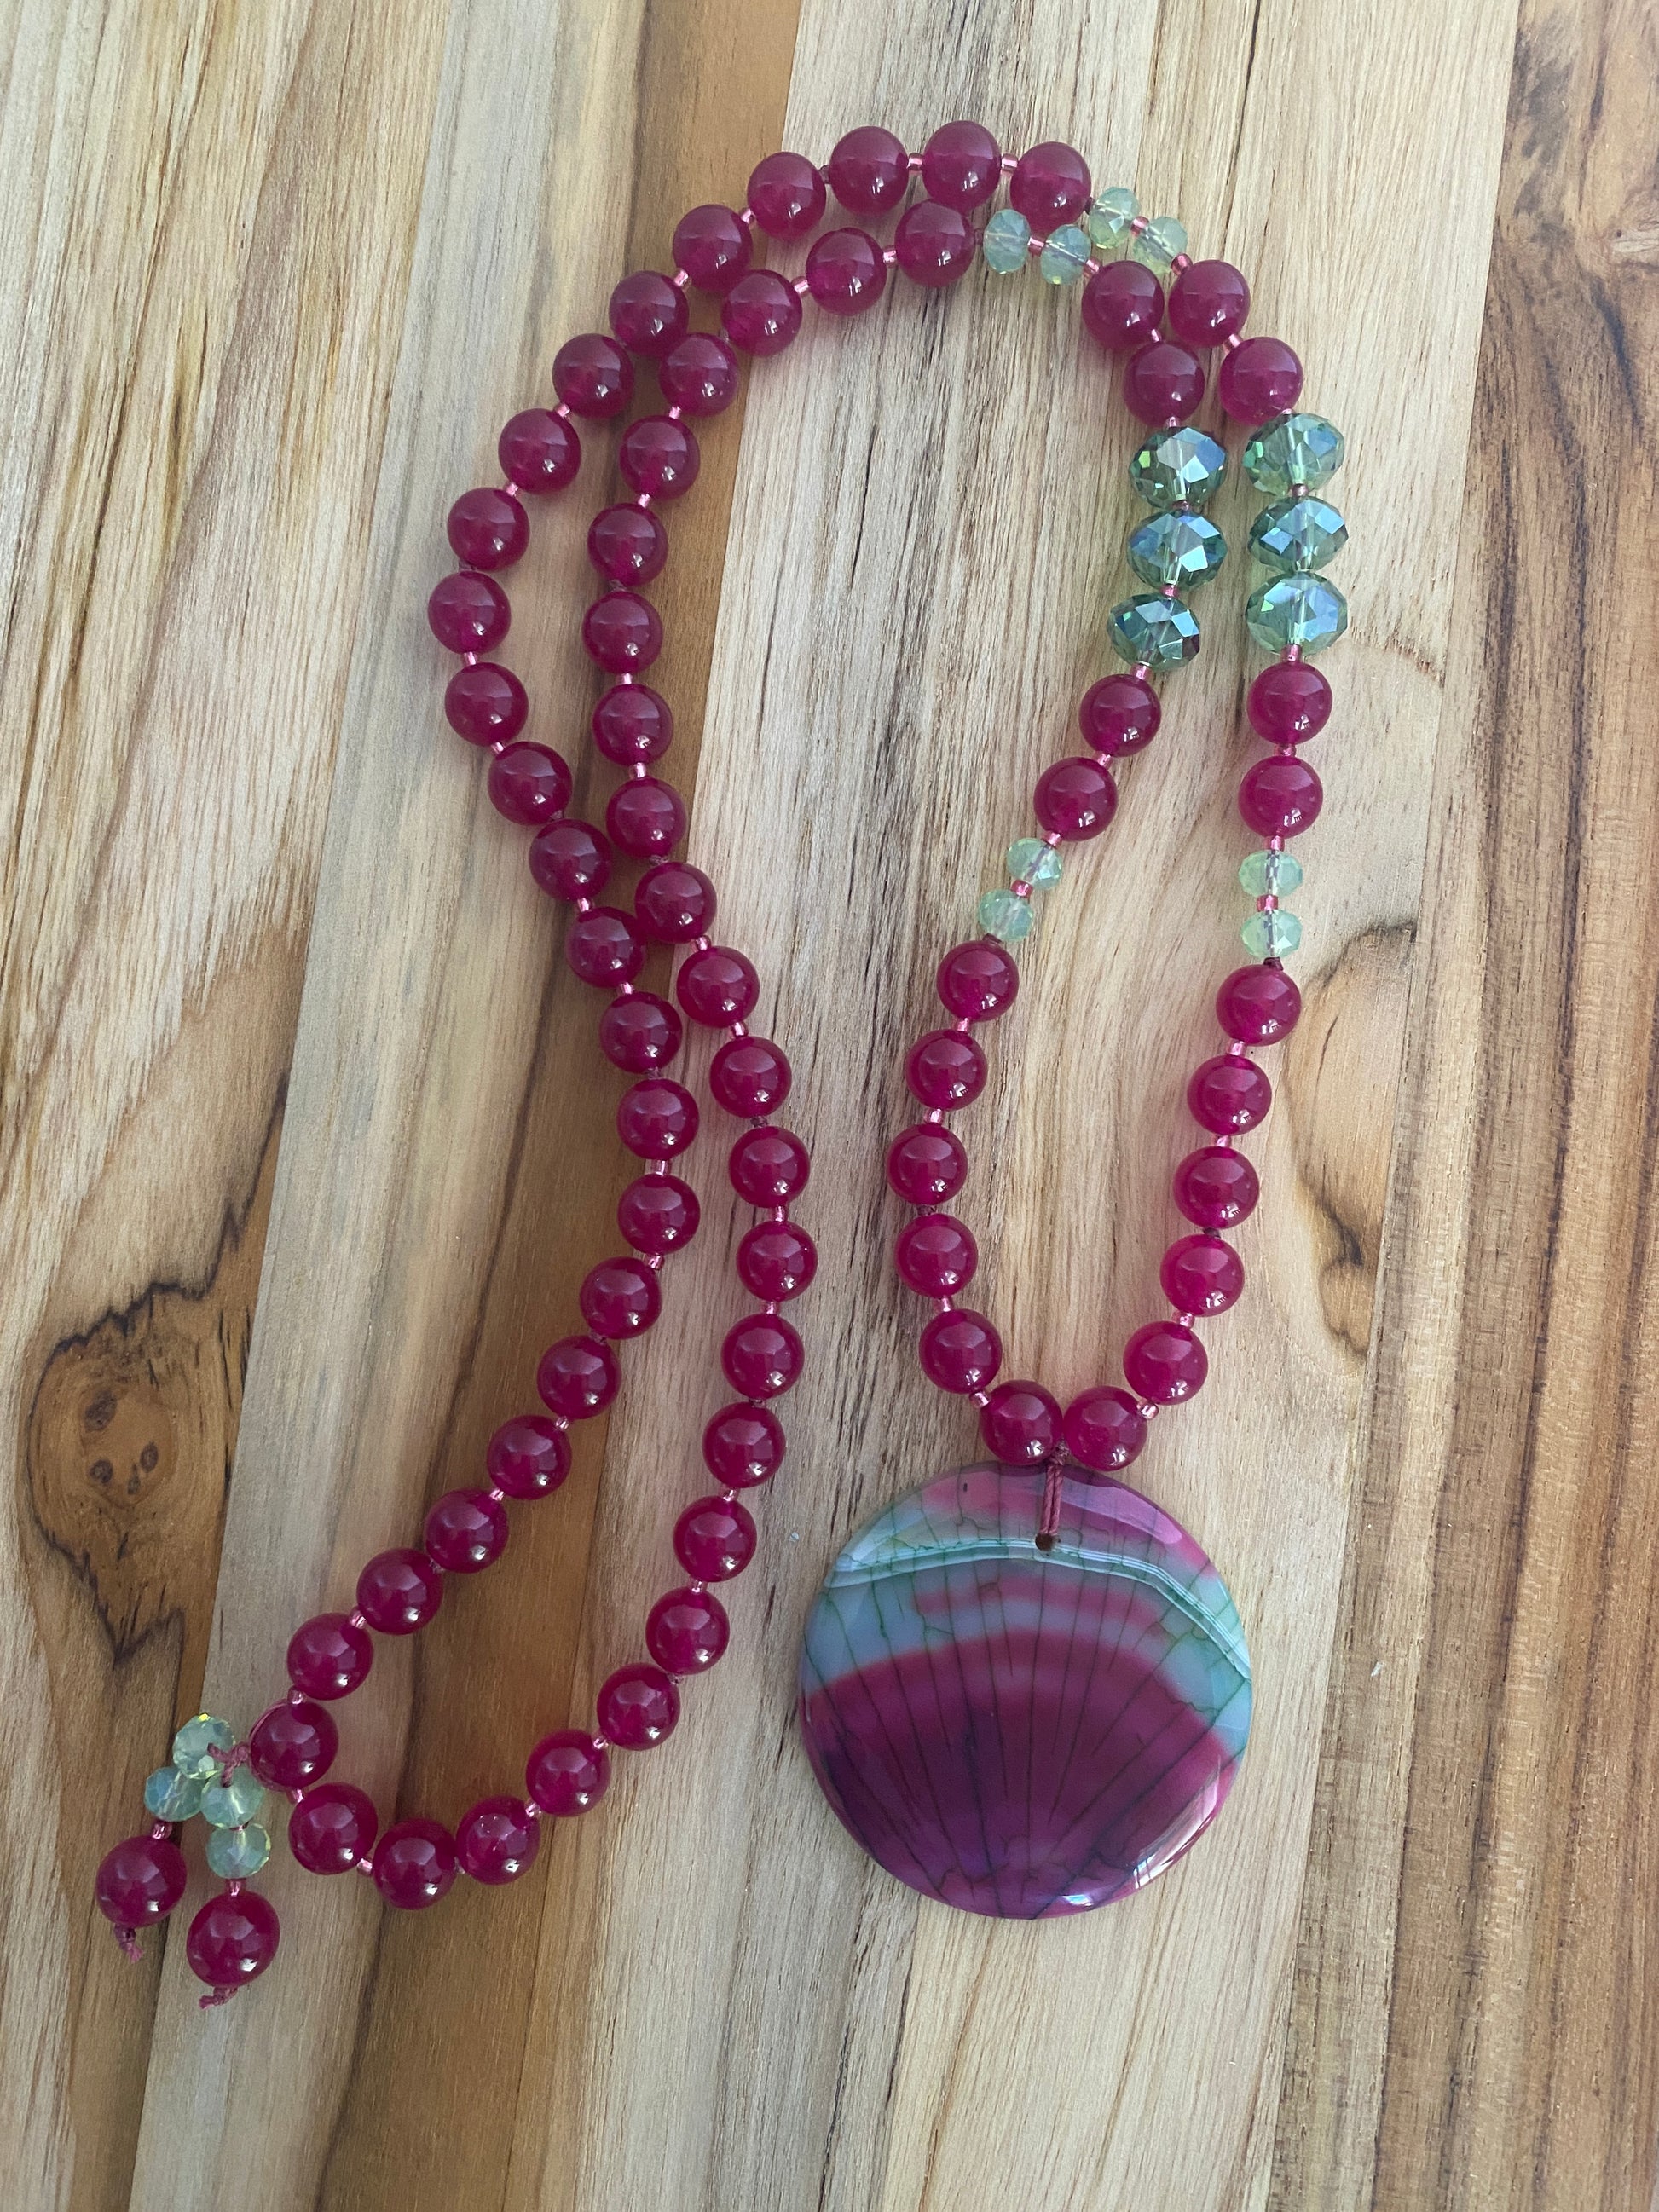 28" Long Rose & Green Round Agate Pendant Necklace with Rose Jade and Crystal Beads - My Urban Gems